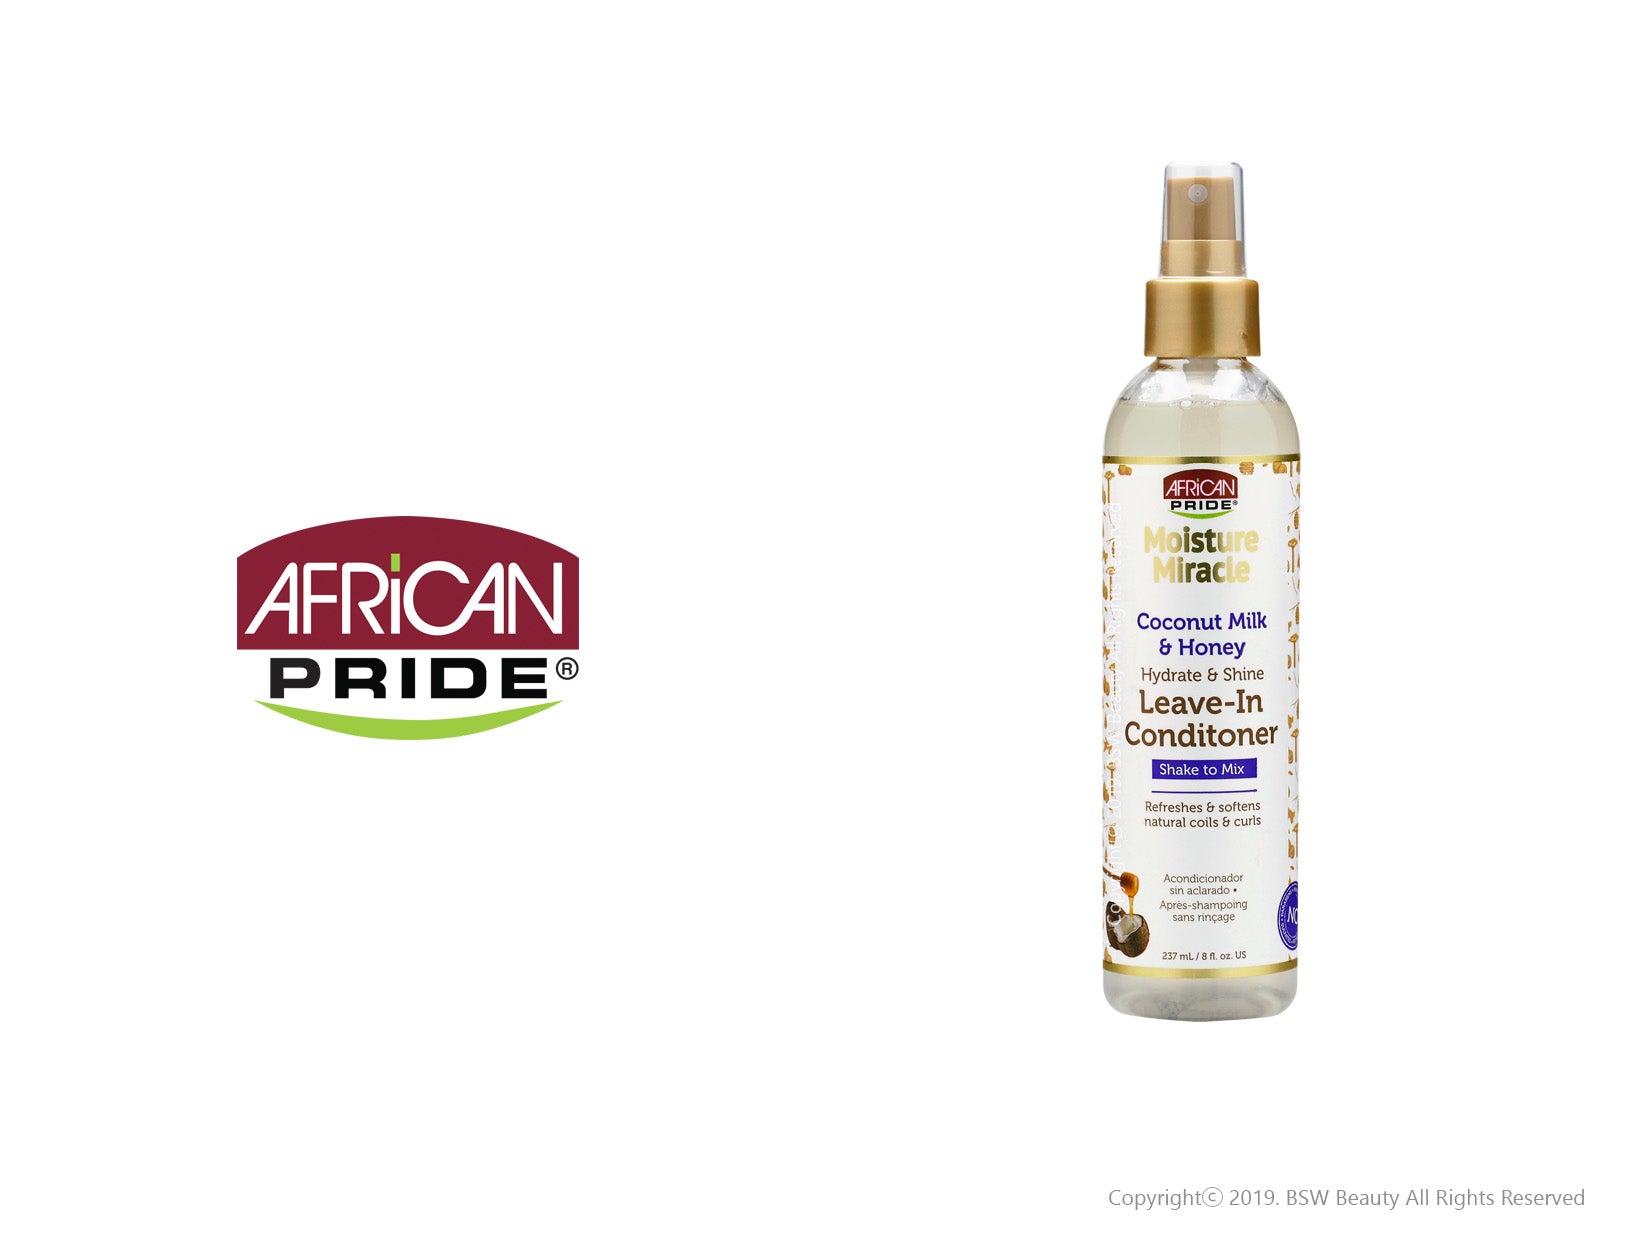 AFRICAN PRIDE MOISTURE MIRACLE HYDRATE & SHINE LEAVE-IN CONDITIONER 8oz